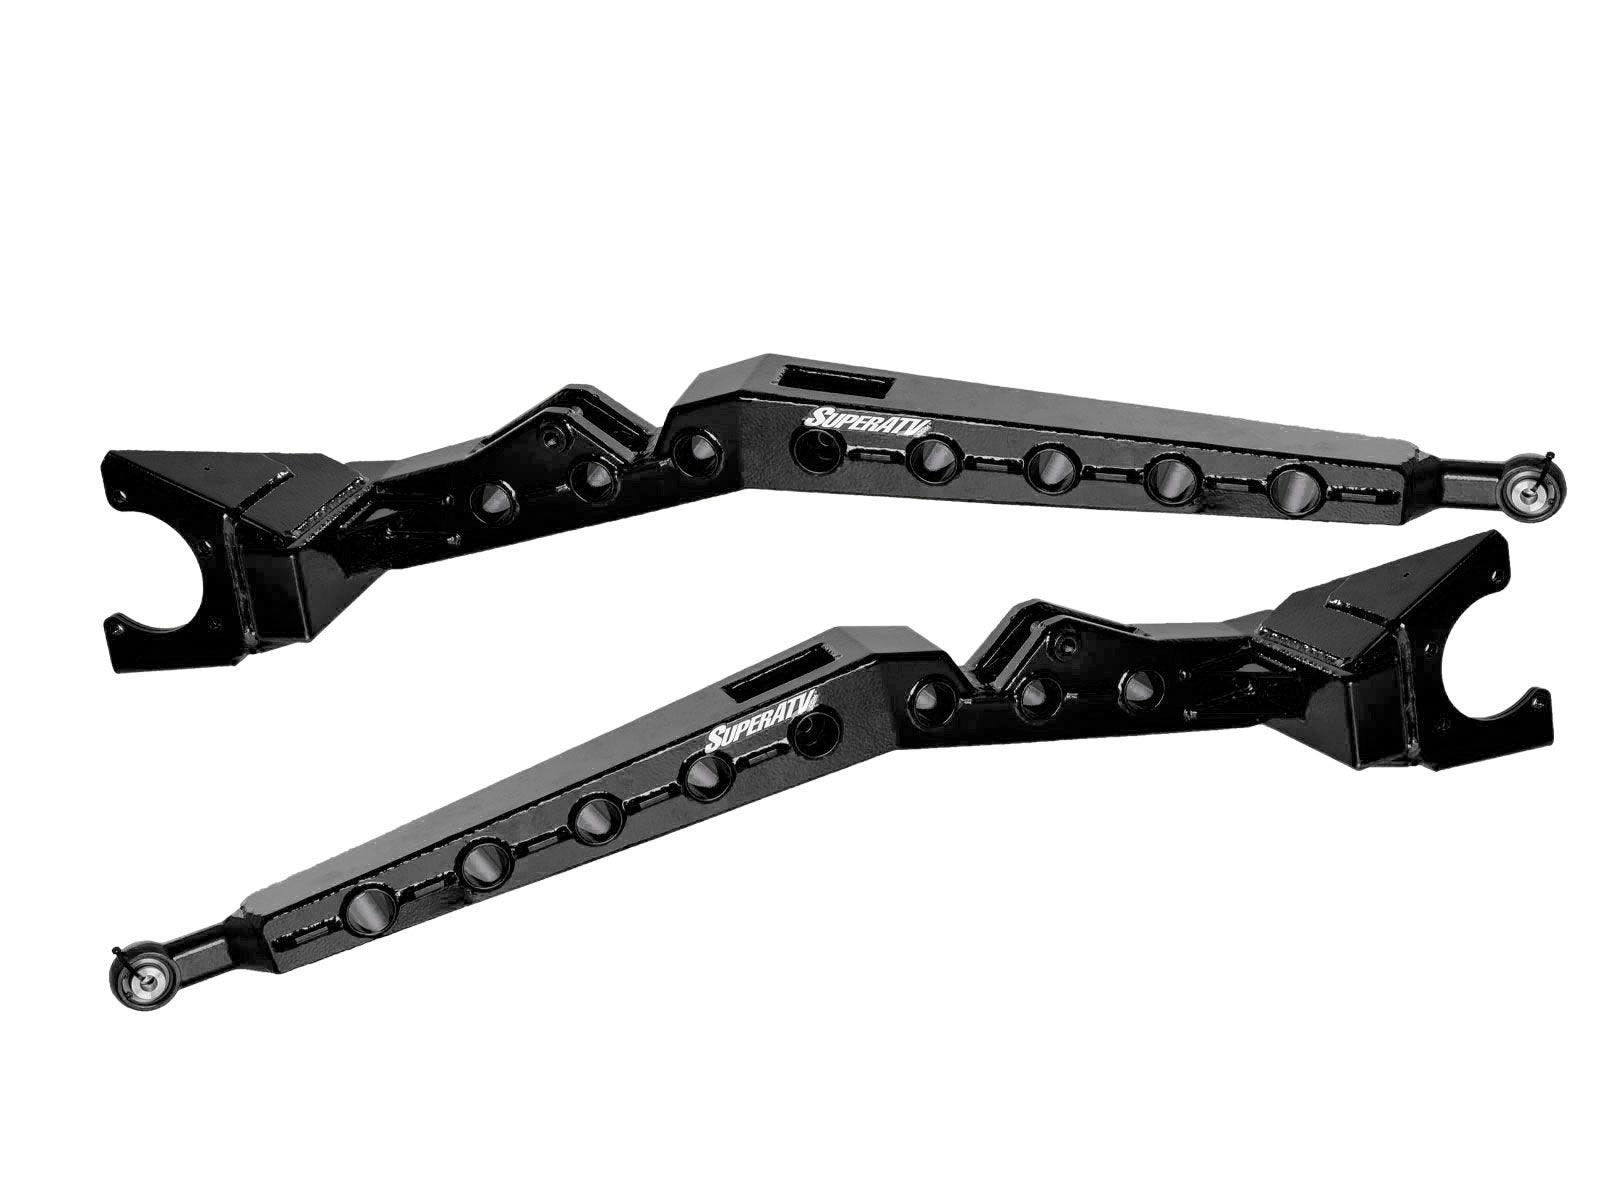 RZR XP Turbo High Clearance Trailing Arms SuperATV - Revolution Off-Road